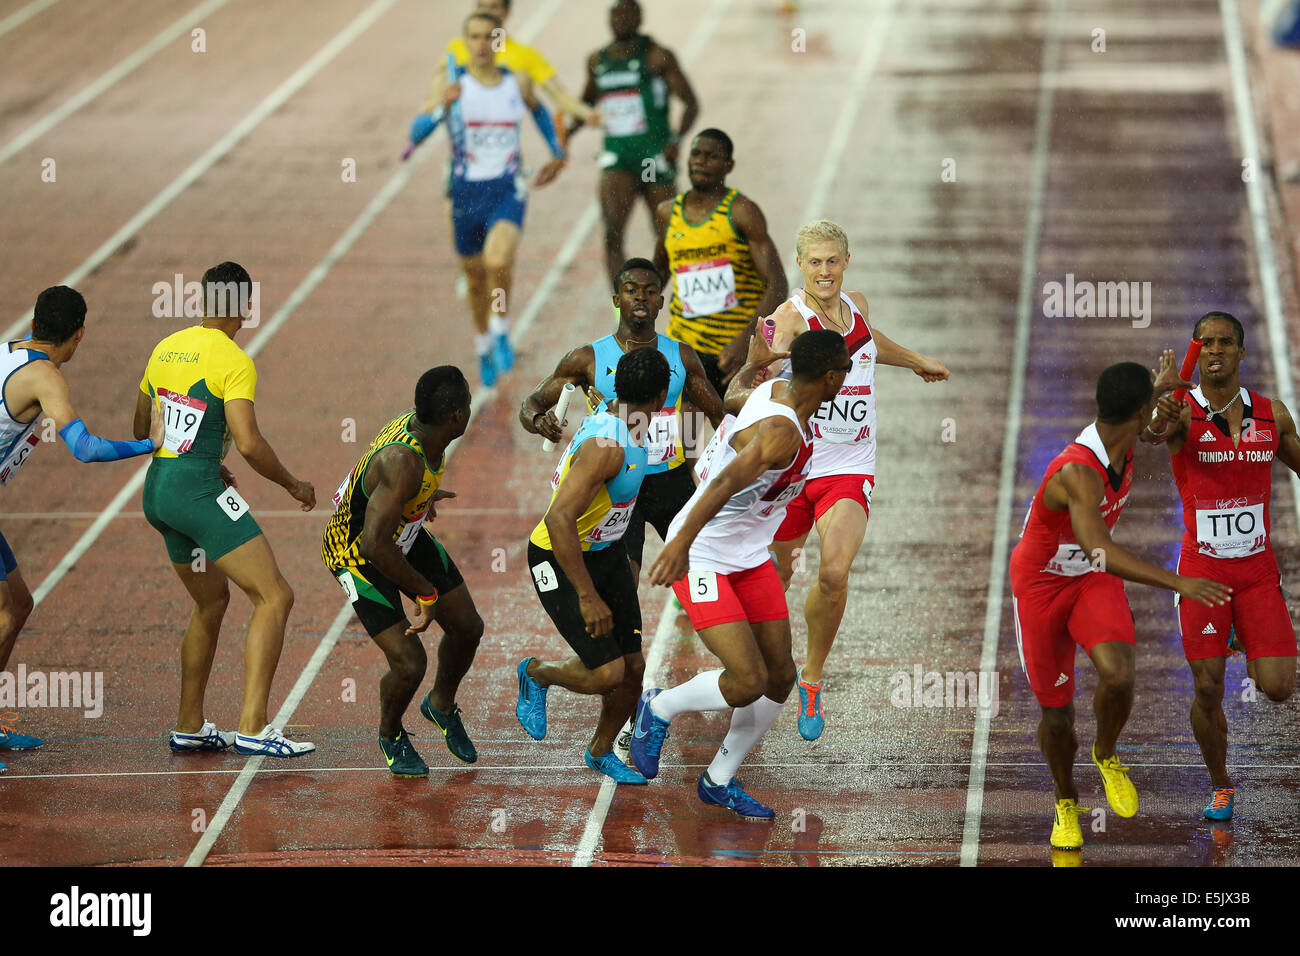 Hampden Park Glasgow 2 August 2014. Commonwealth Games day 10 Athletics.  Men's 4x400 relay final. England take gold. Bahamas take silver and Trinidad & Tobago take bronze. Credit:  ALAN OLIVER/Alamy Live News Stock Photo